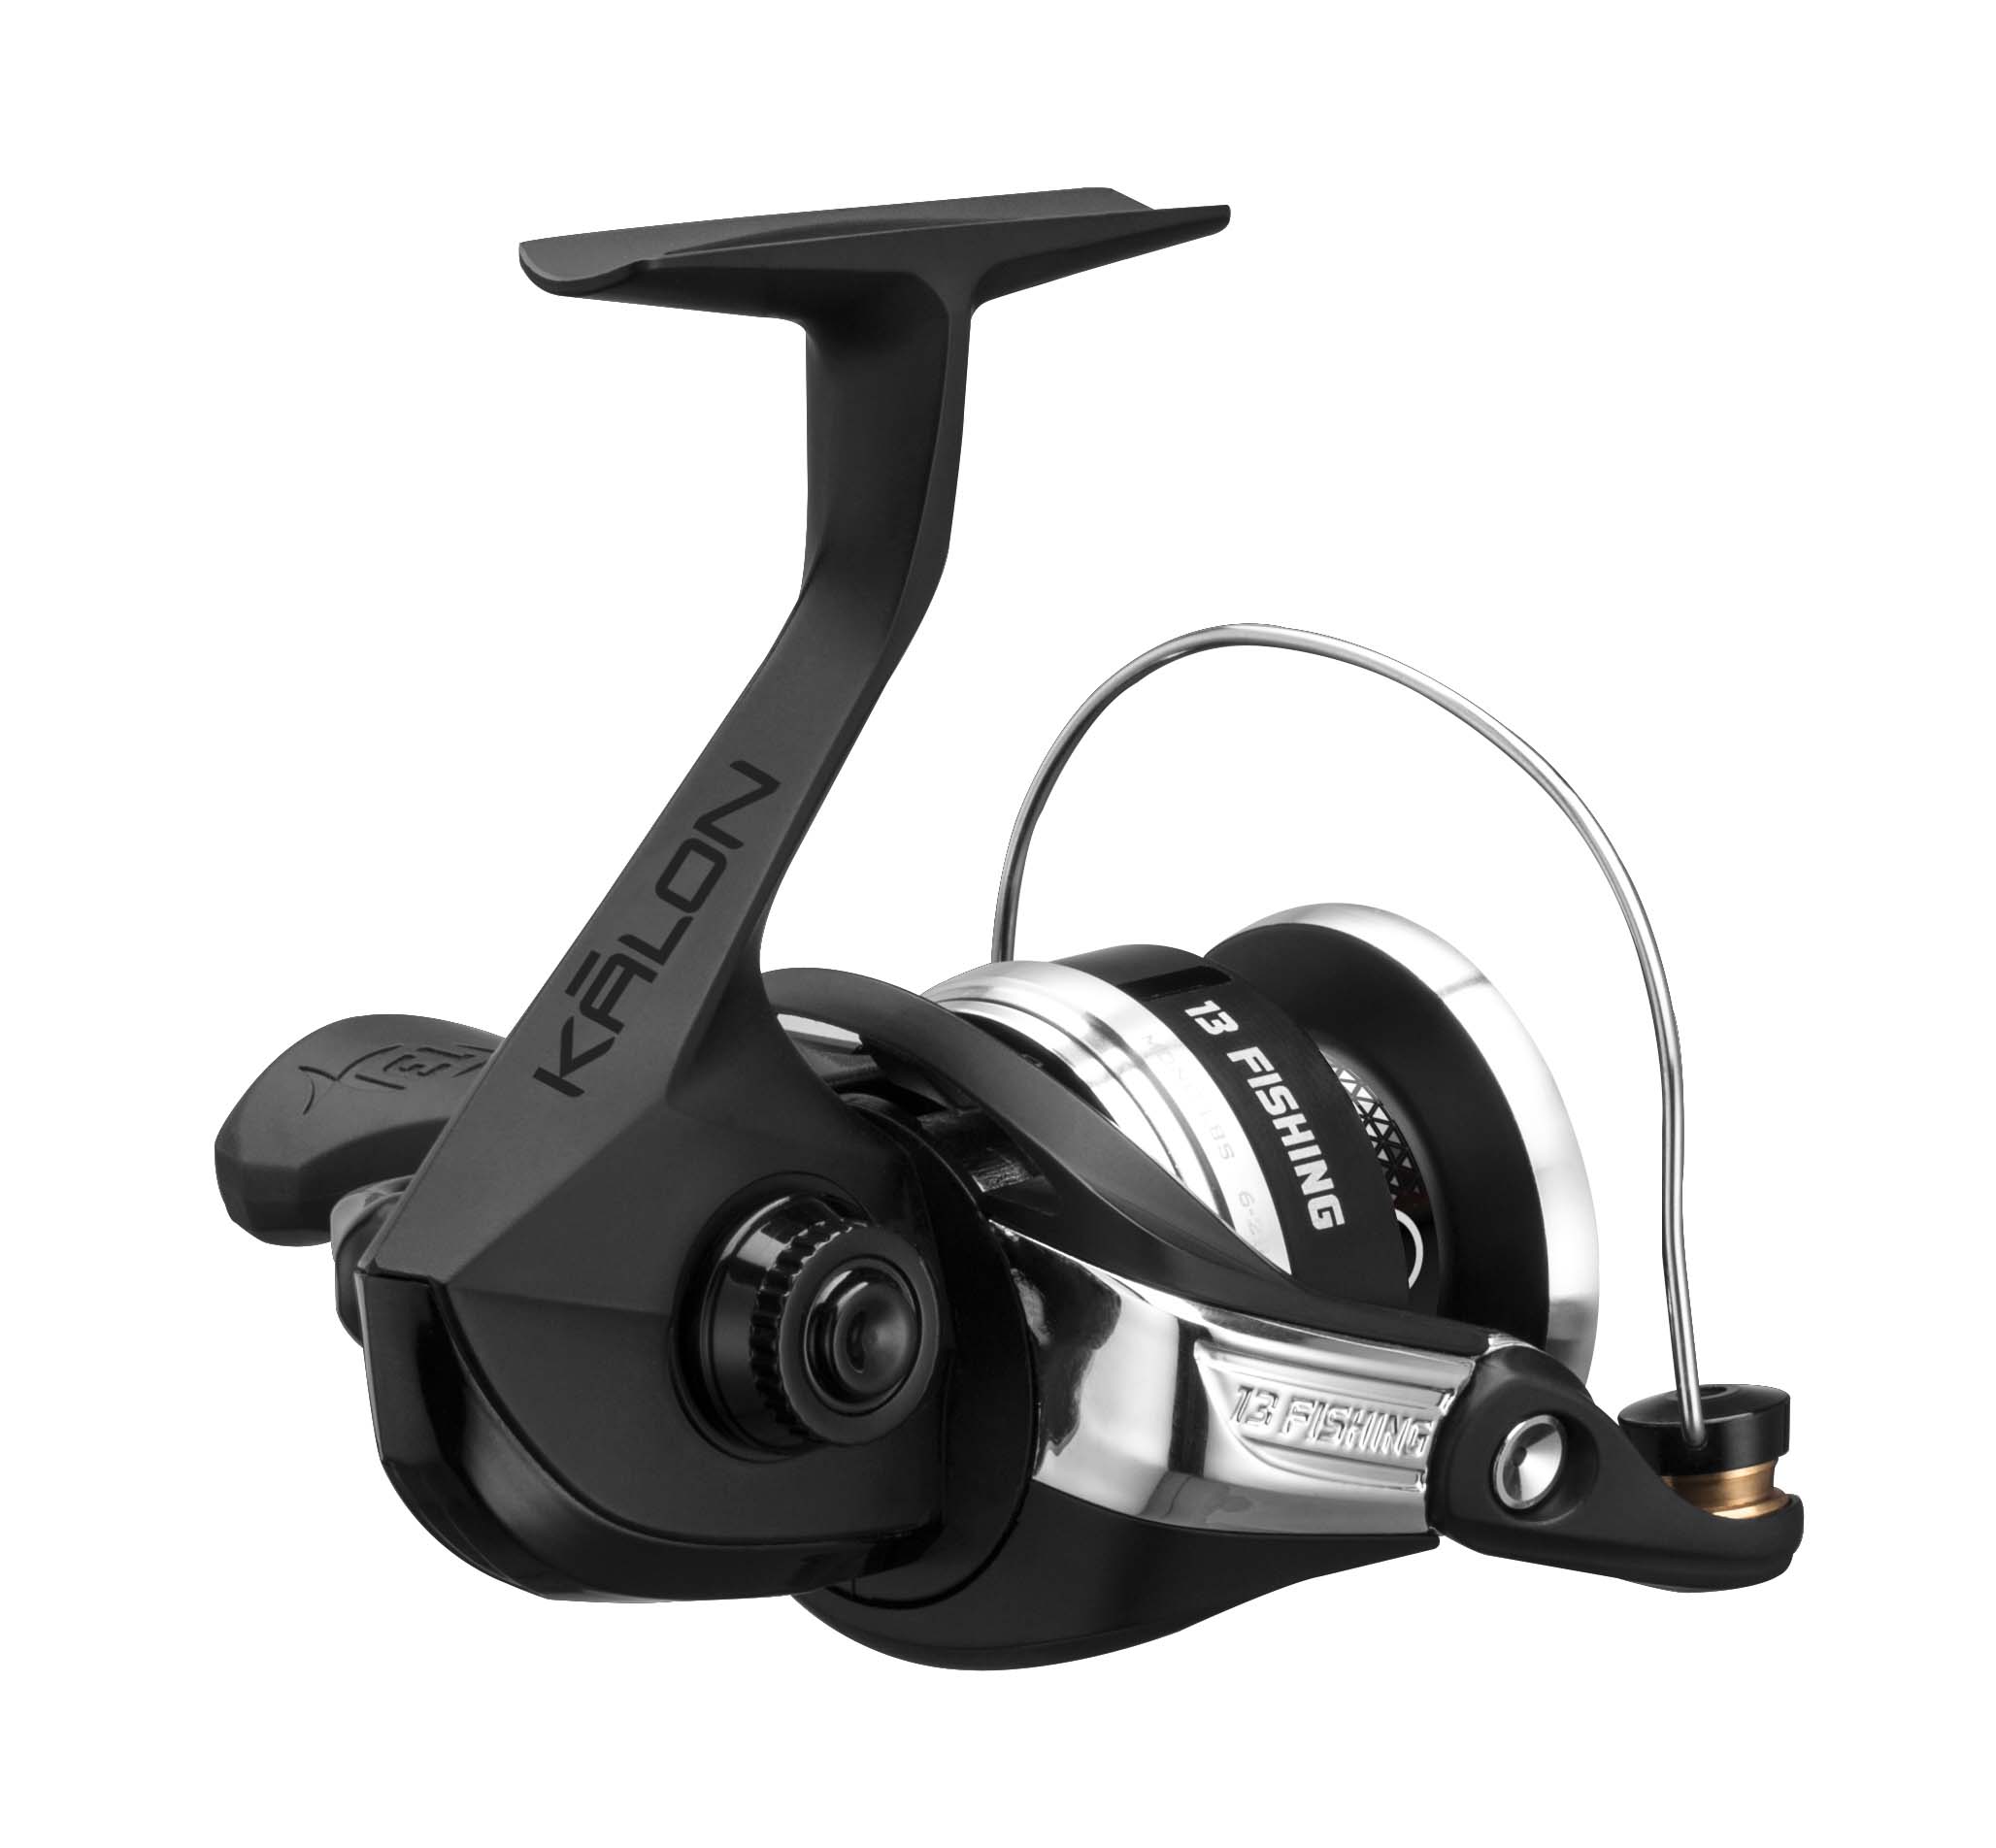 https://op1.0ps.us/original/opplanet-13-fishing-kalon-a-spinning-reel-5-4-1-gear-ratio-fold-down-handle-clam-pack-black-0-5-kla-5-4-5-fdh-cp-main